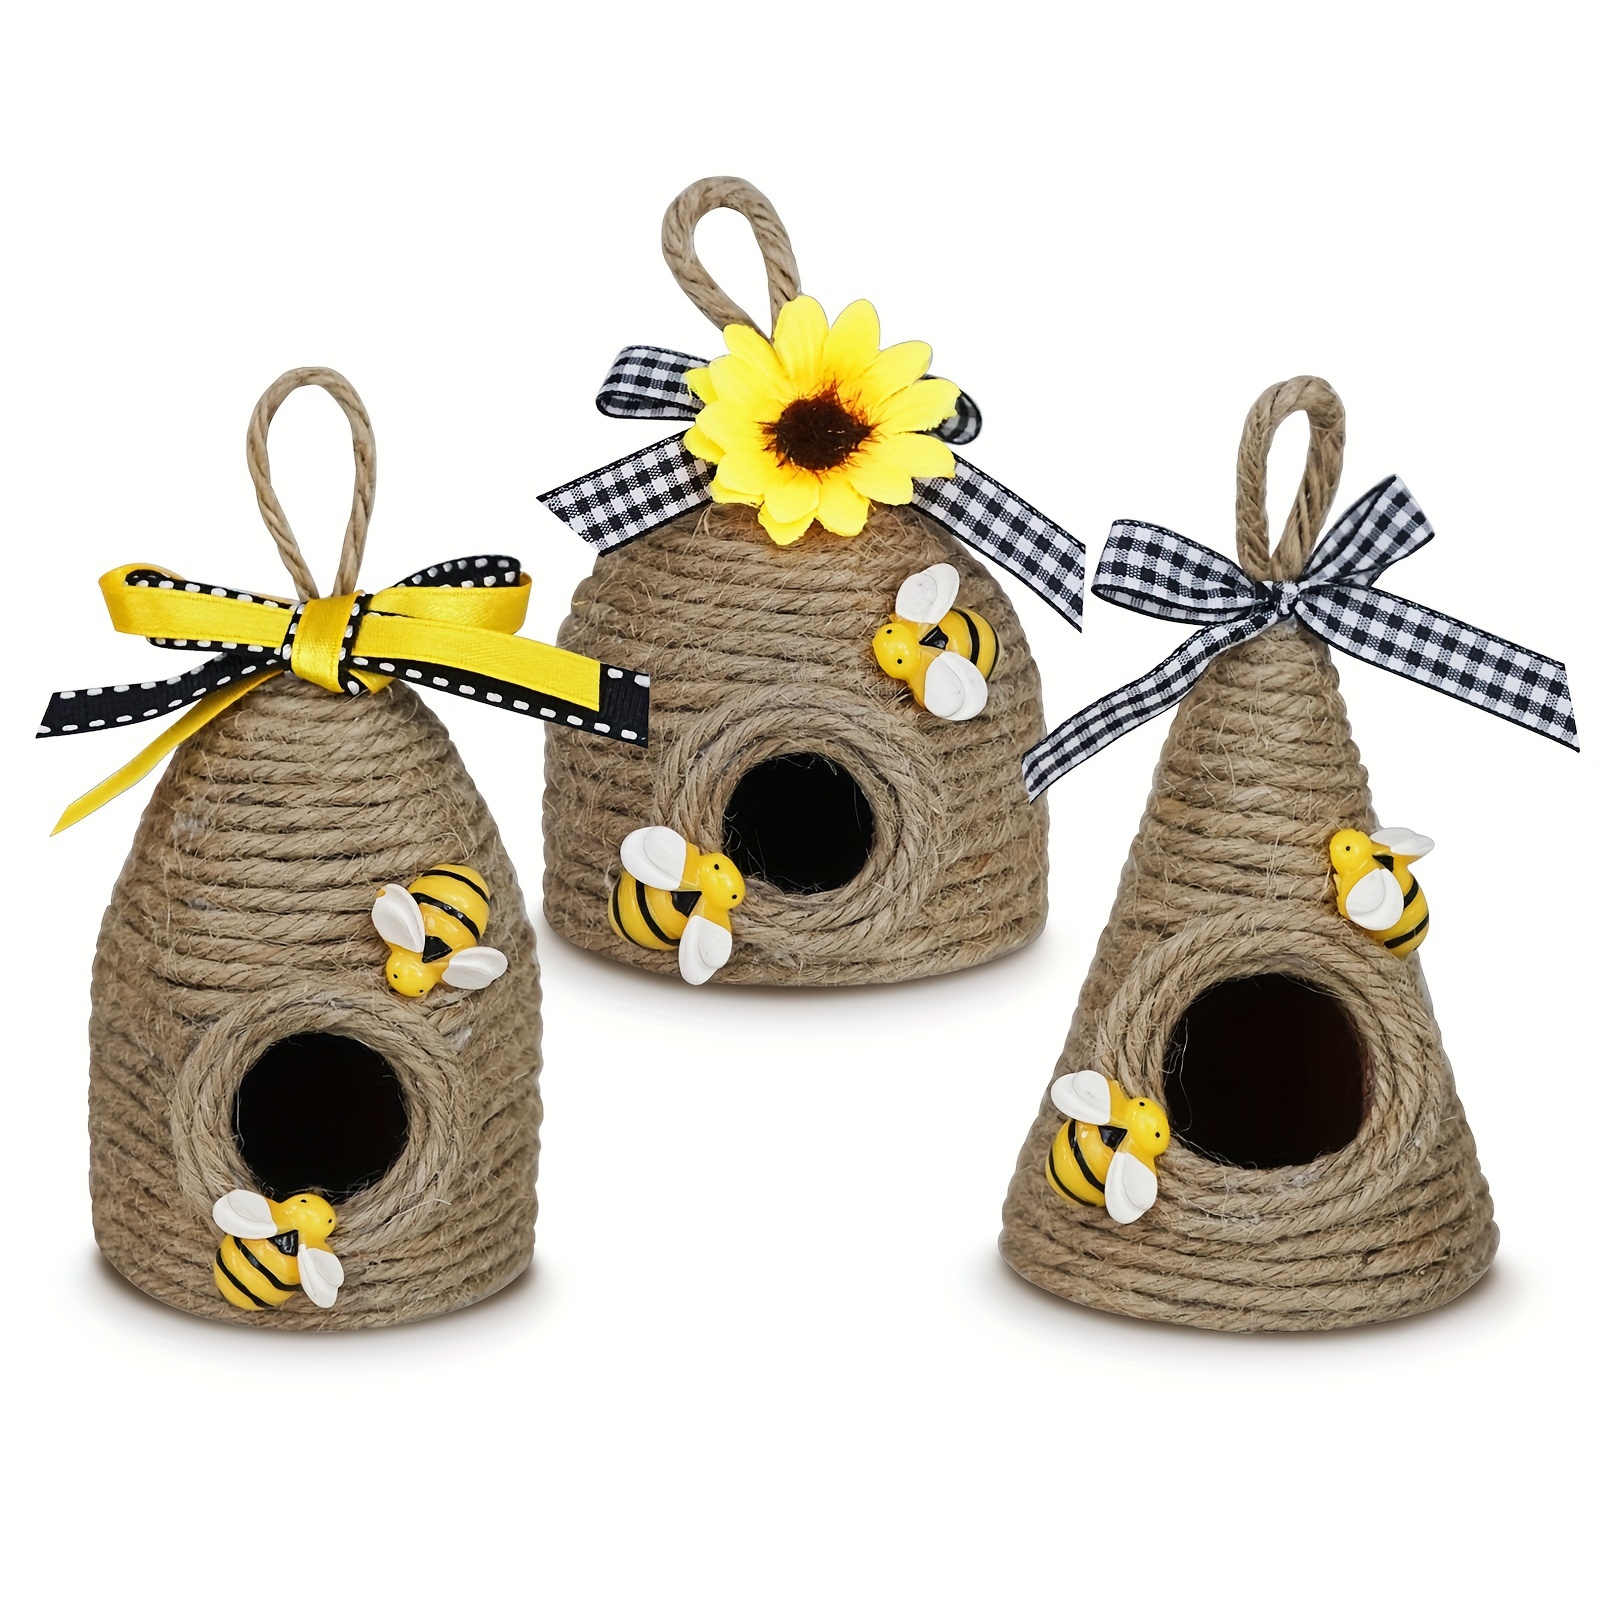 

3pcs Bee Hive Decor, Bumble Bee Rustic Decor Hive, Natural Bee House, Bumble Bee Theme Party Decor Spring Summer Rustic Farmhouse Kitchen Table Tiered Tray Decor